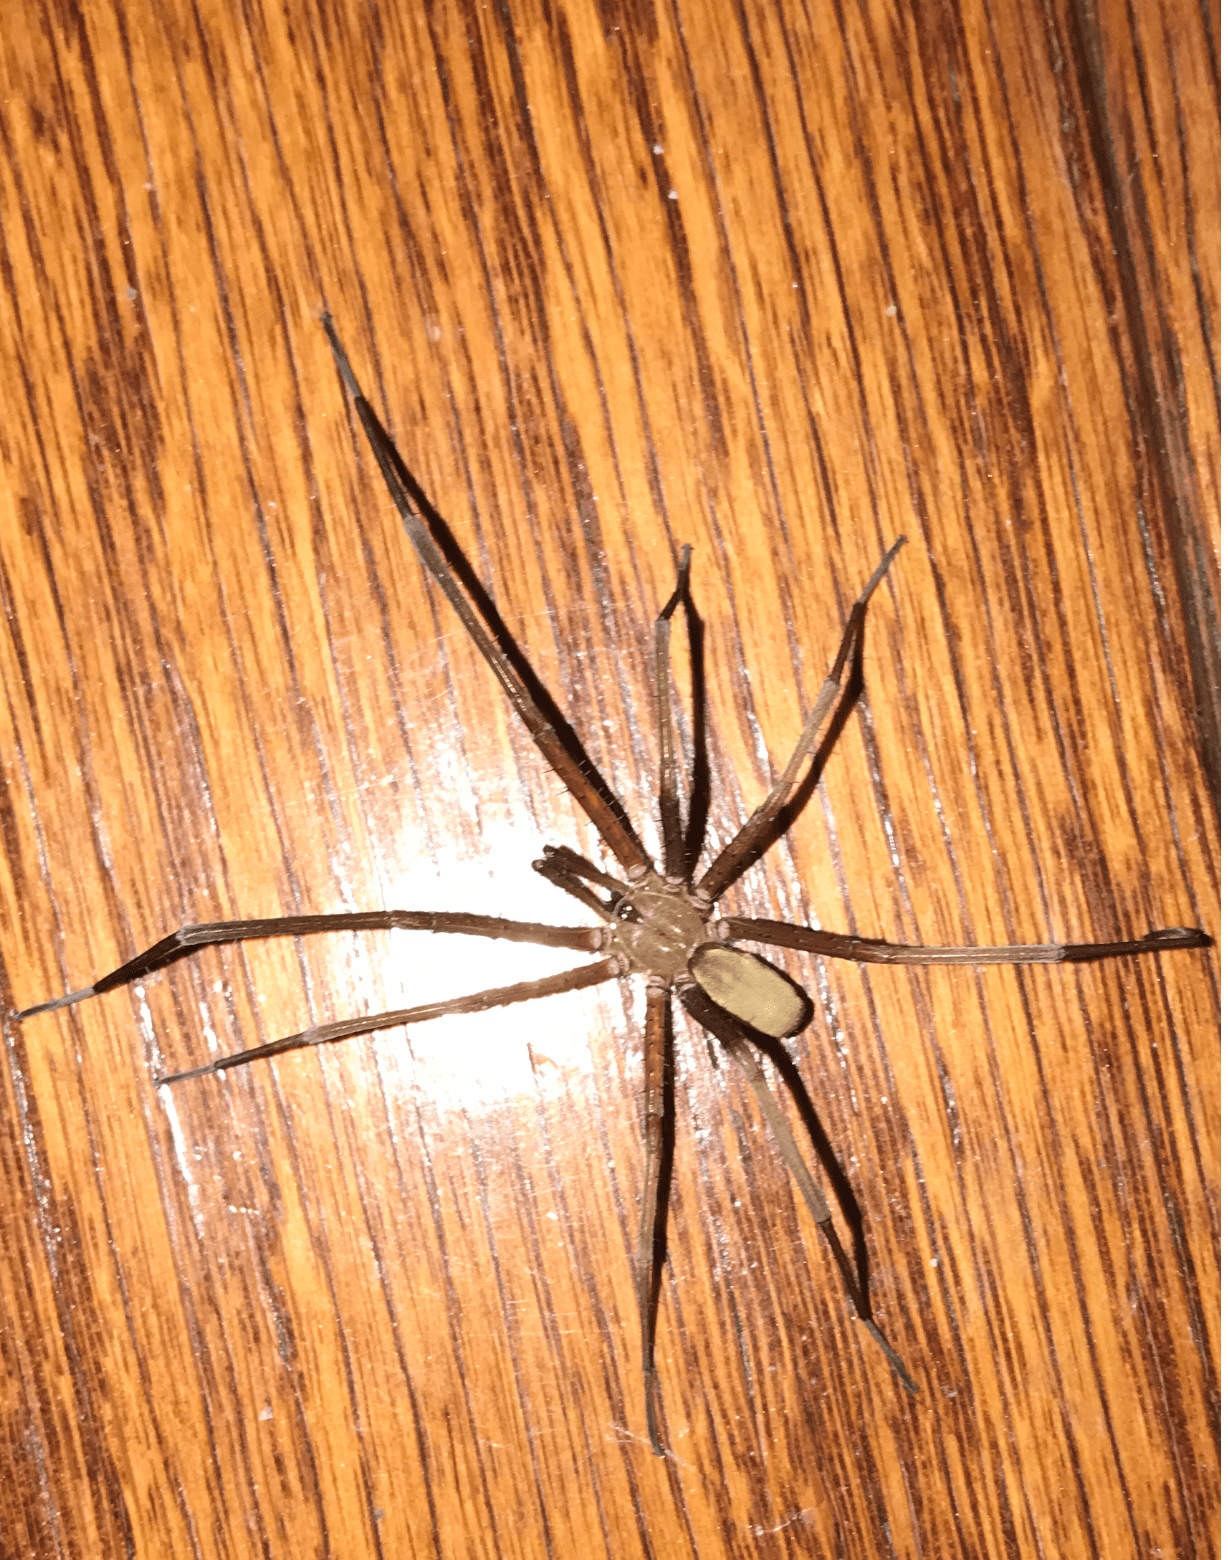 Picture of Kukulcania hibernalis (Southern House Spider) - Male - Dorsal